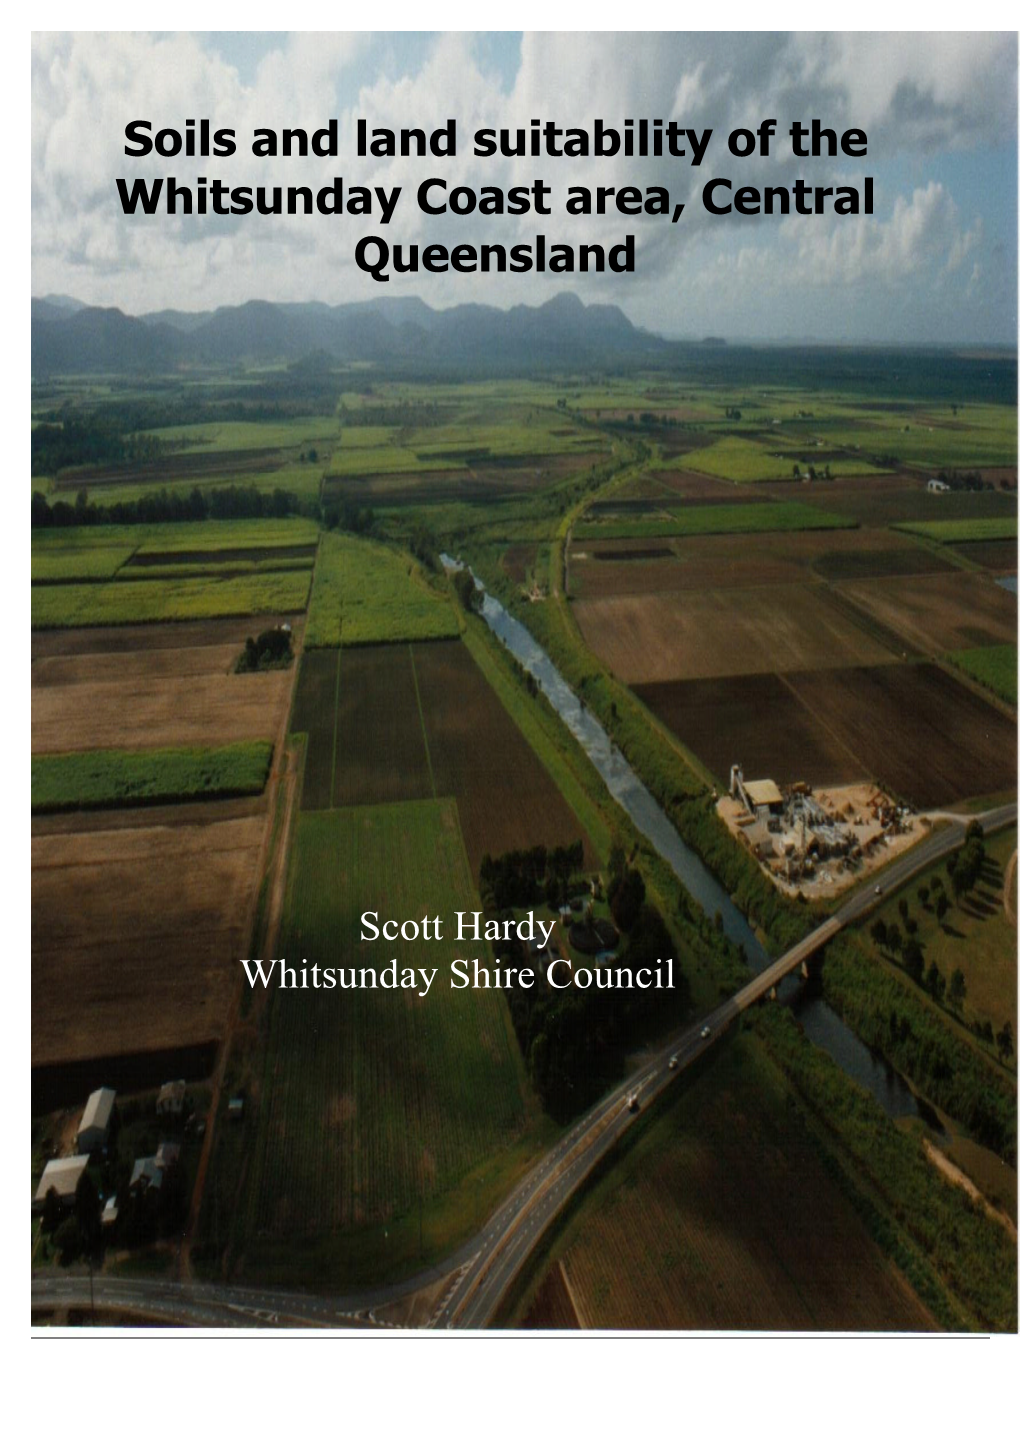 Soils and Land Suitability of the Whitsunday Coast Area, Central Queensland